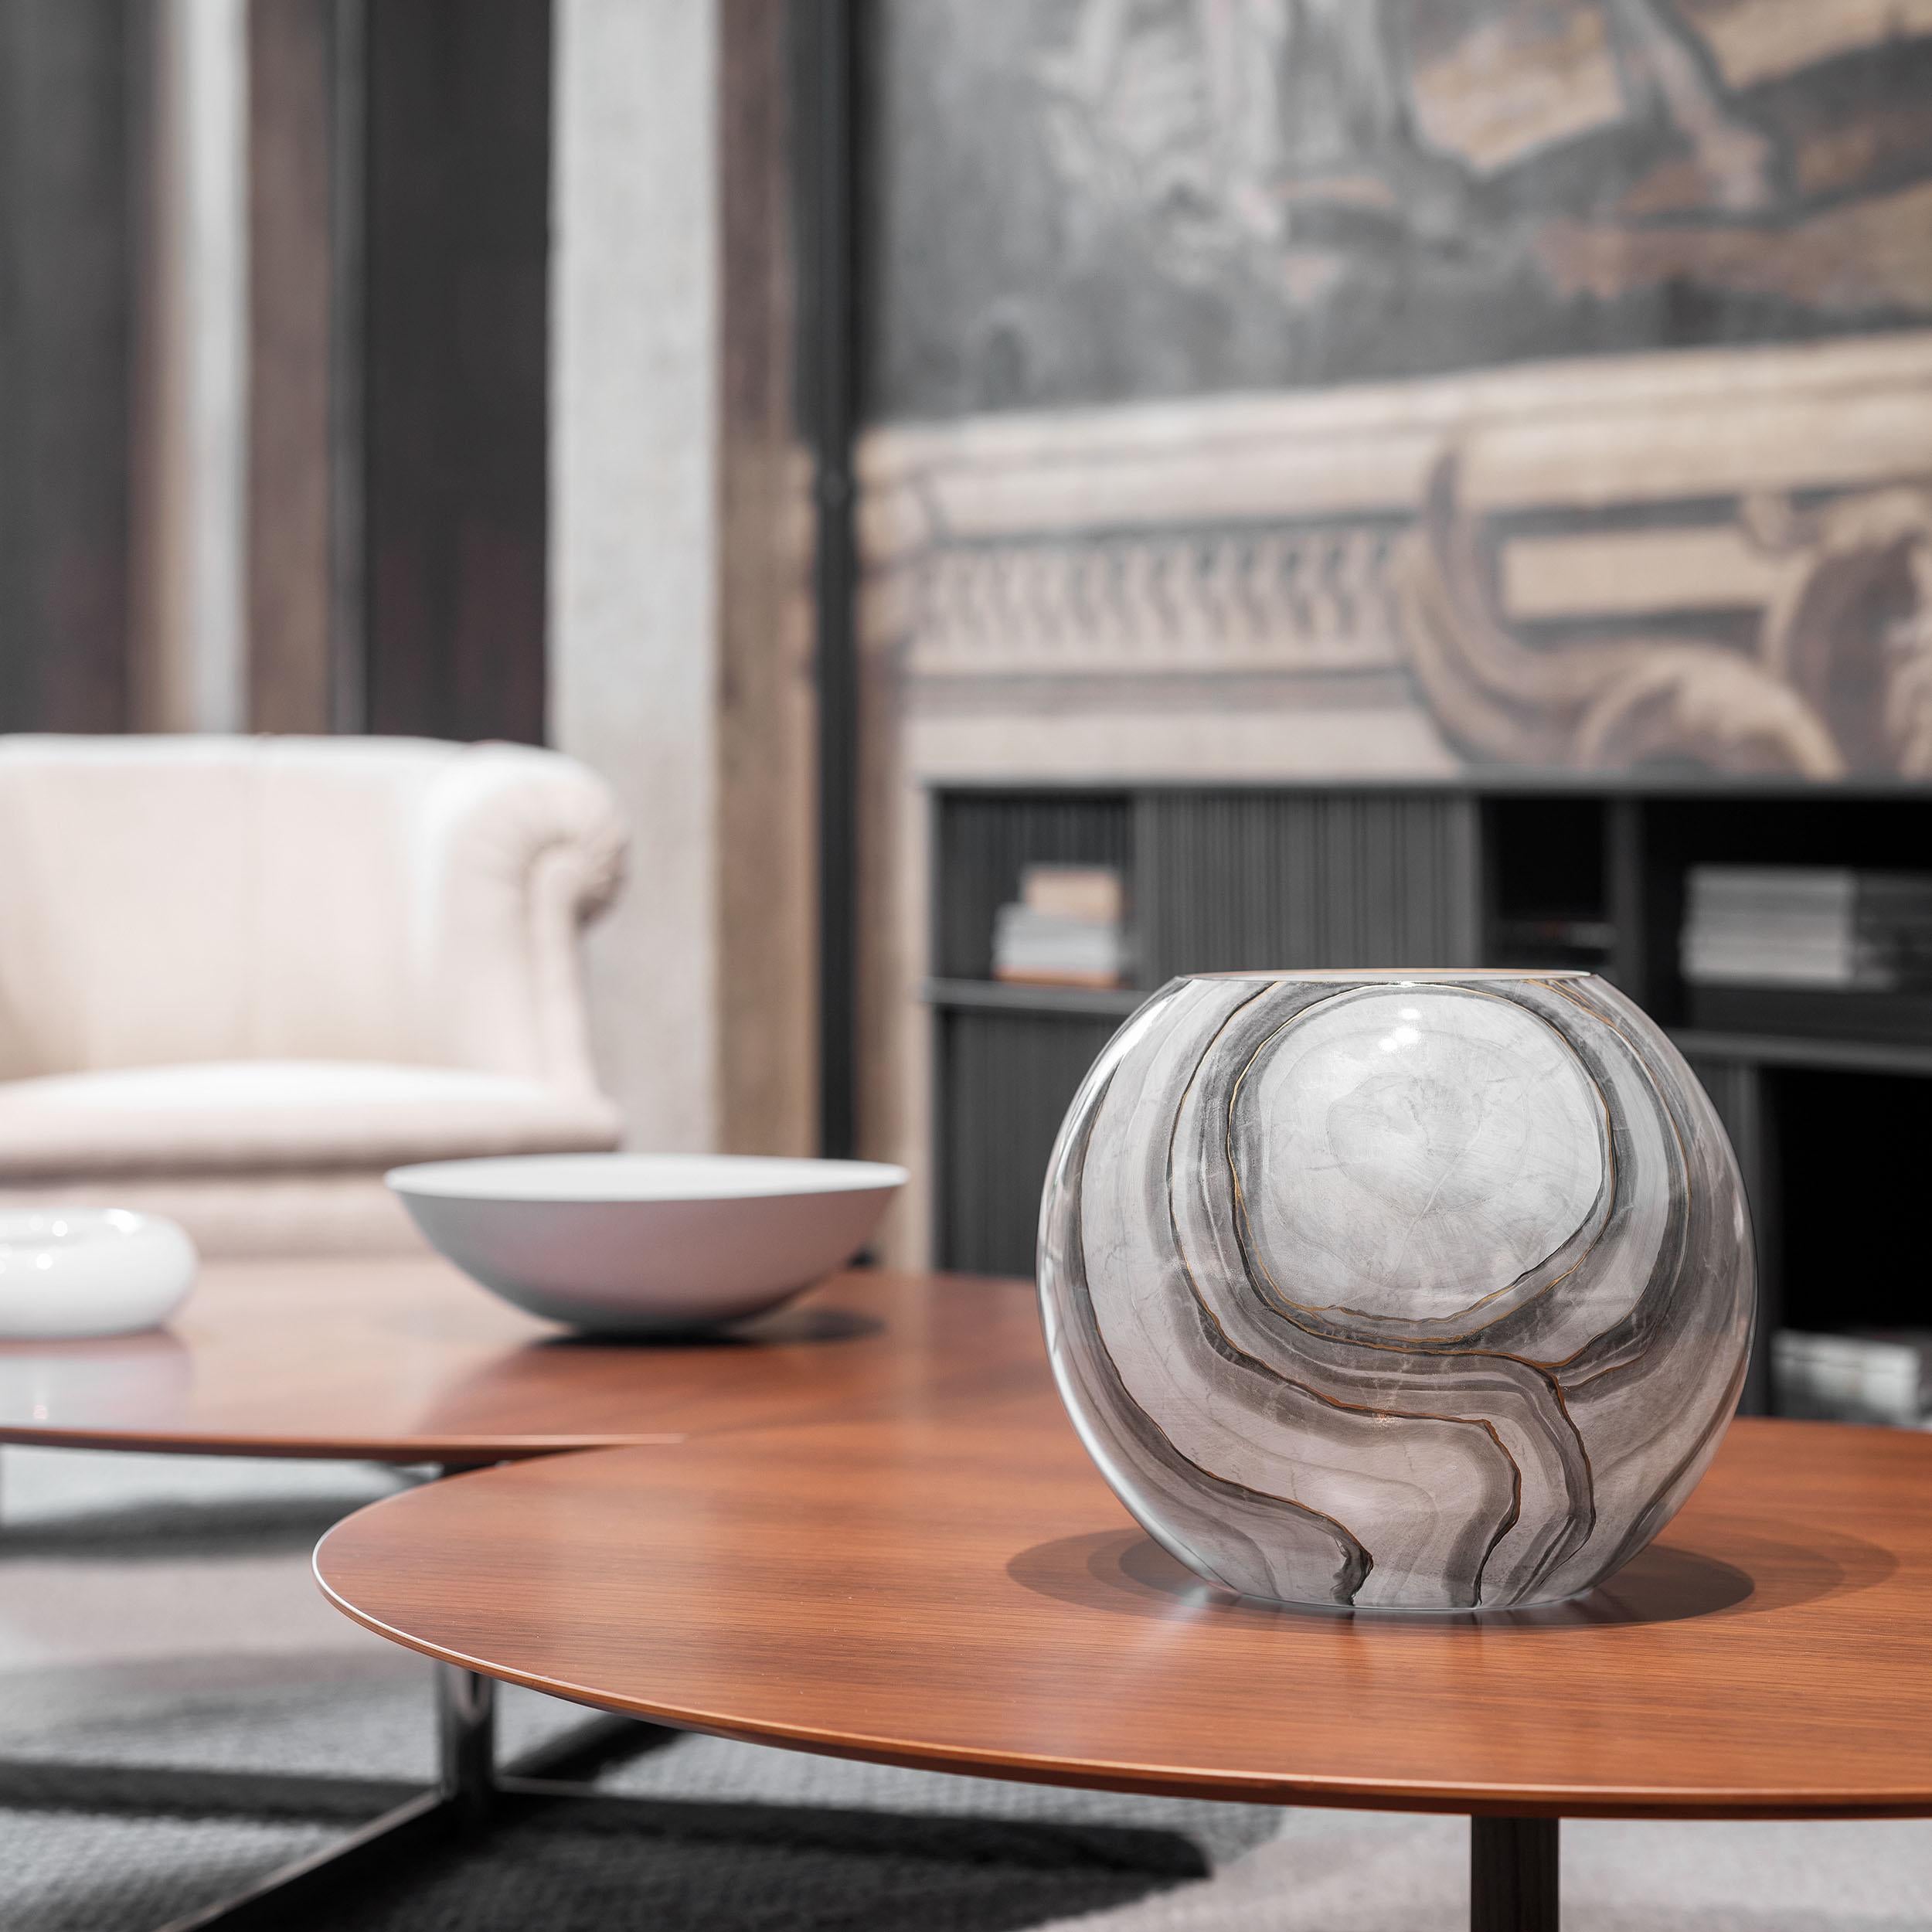 Add originality to your space with this vase crafted from hand-blown glass with a marbleized finish.